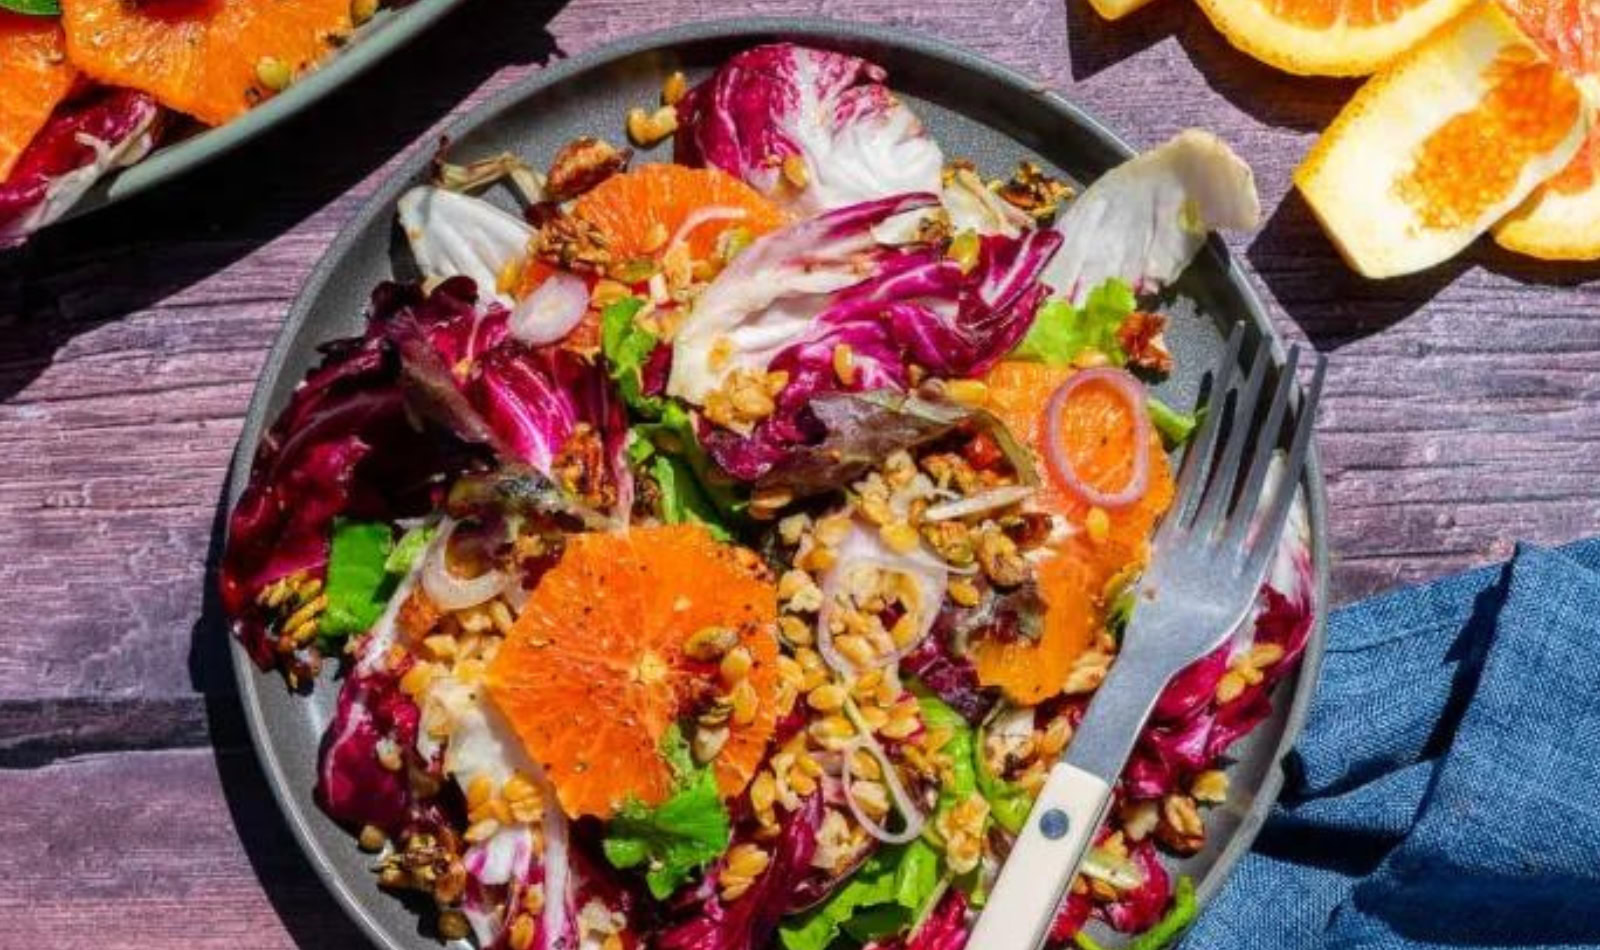 a plate of salad with einkorn, radicchio, and oranges. 